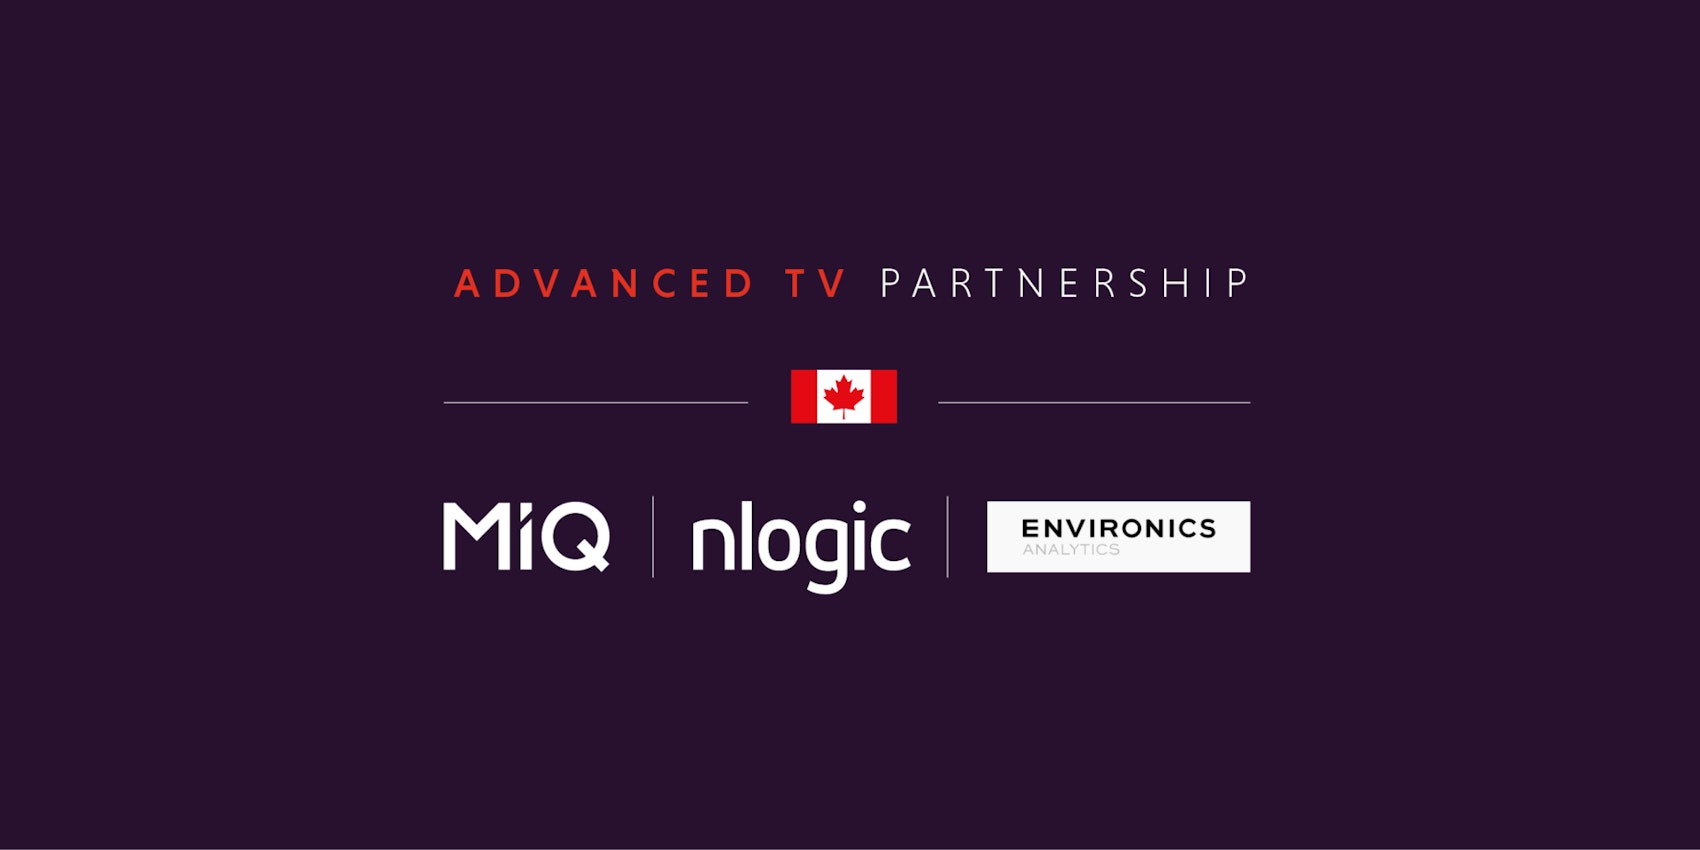 MiQ partners with Environics Analytics and NLogic to deliver connected TV campaigns